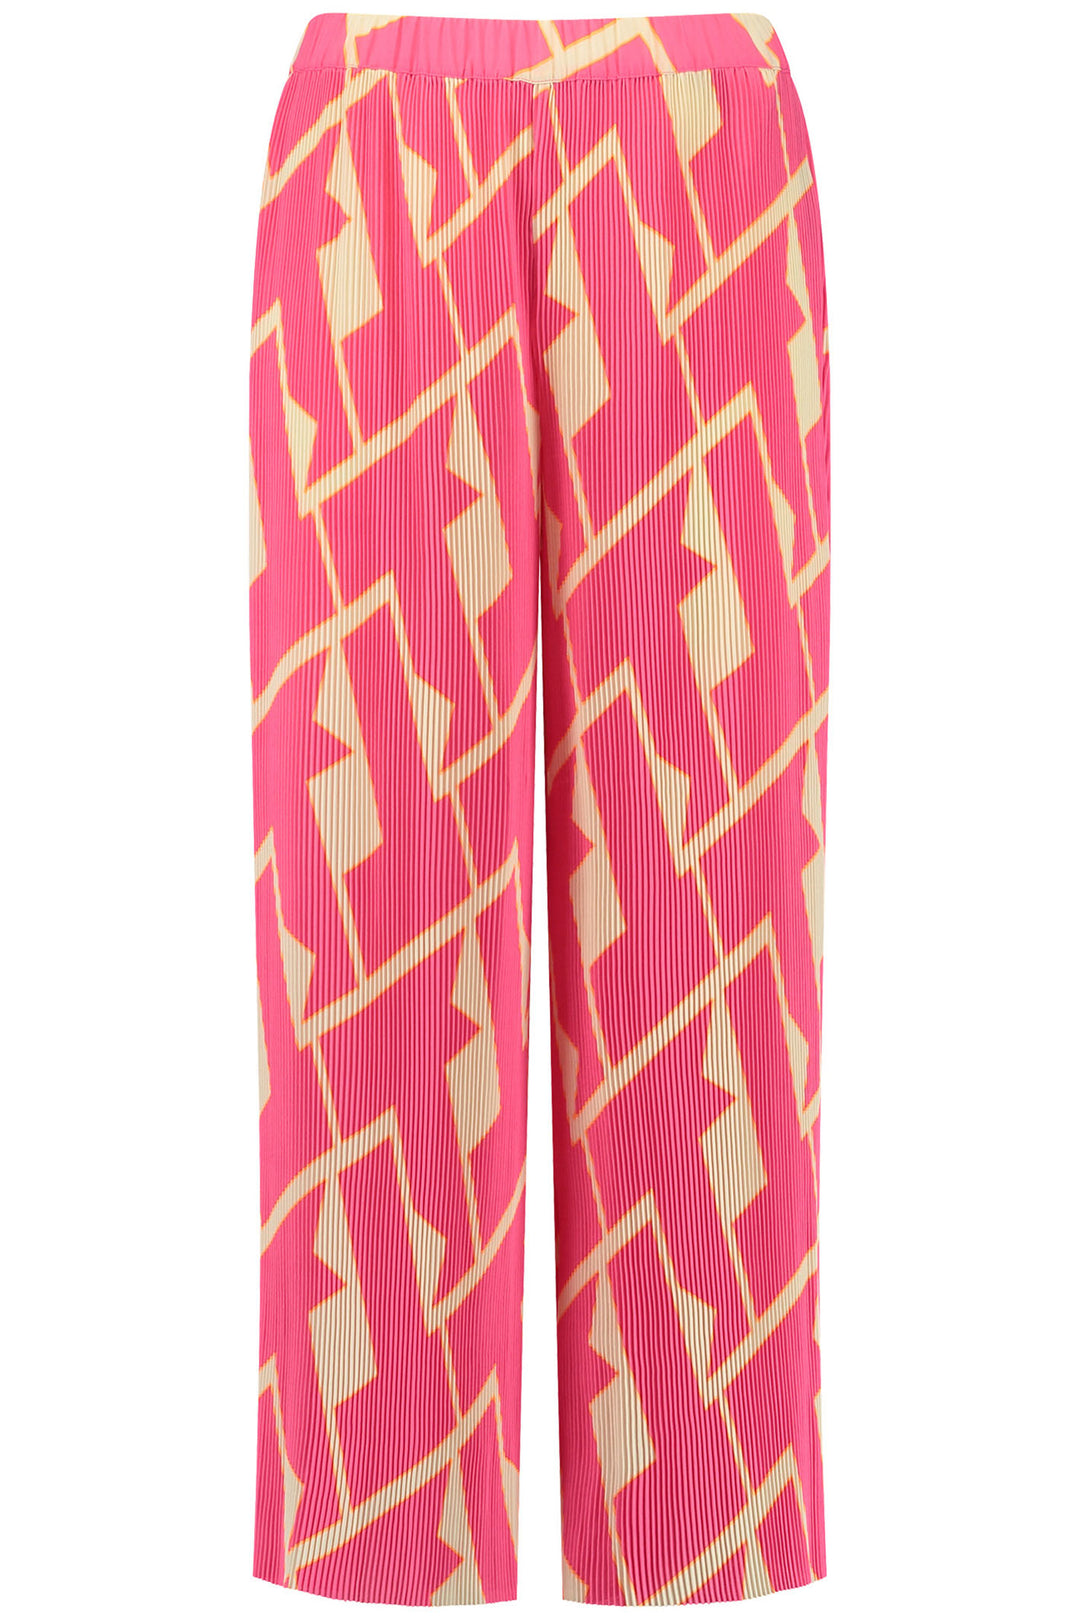 Gerry Weber 222116 Pink Geo Print Wide Leg Pleated Trousers - Experience Boutique